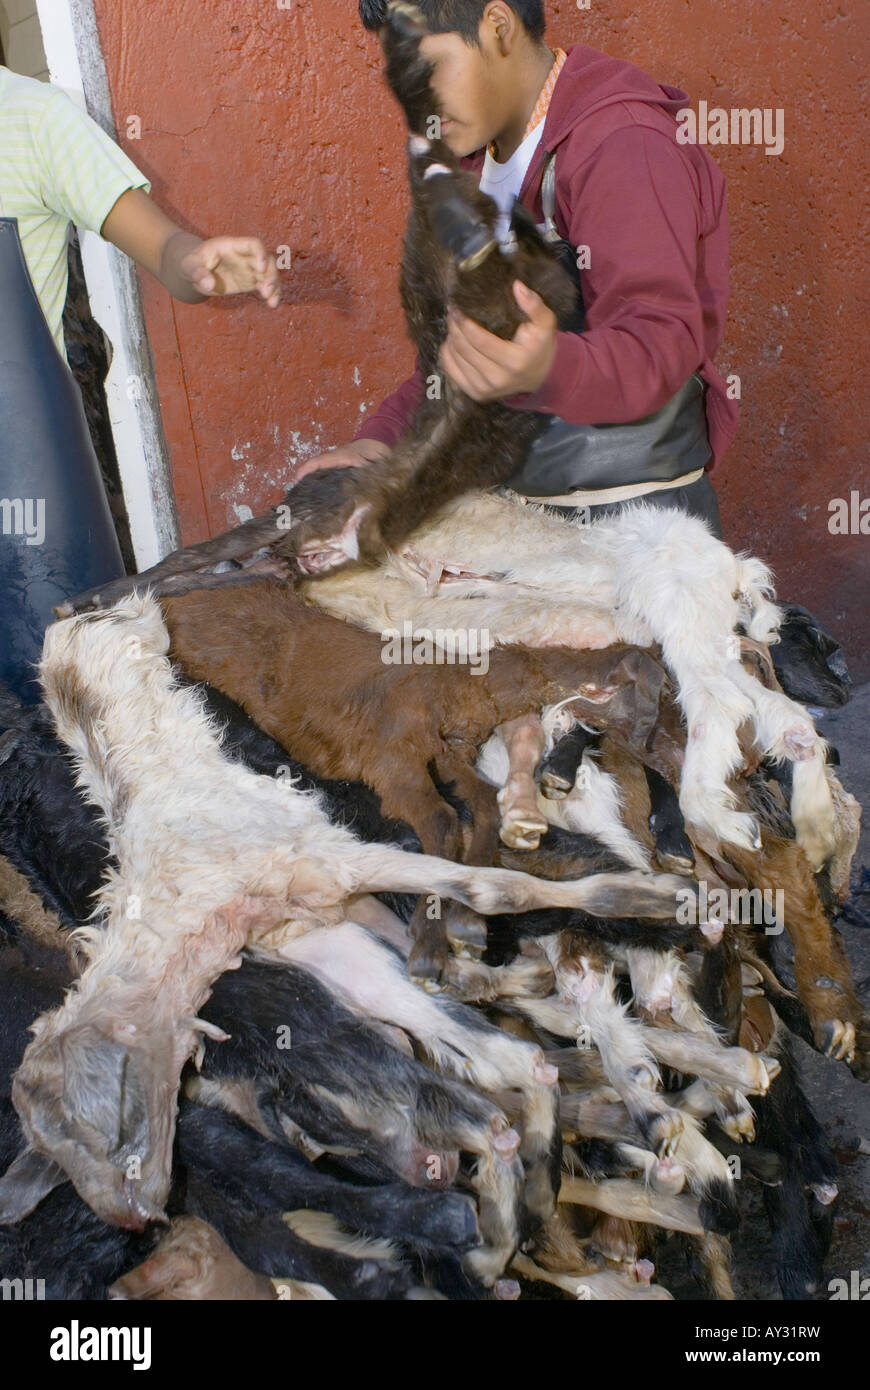 Baby goat cabrito being loaded on to carts from a refrigerated storage area at the San Juan market in Mexico City center. Stock Photo